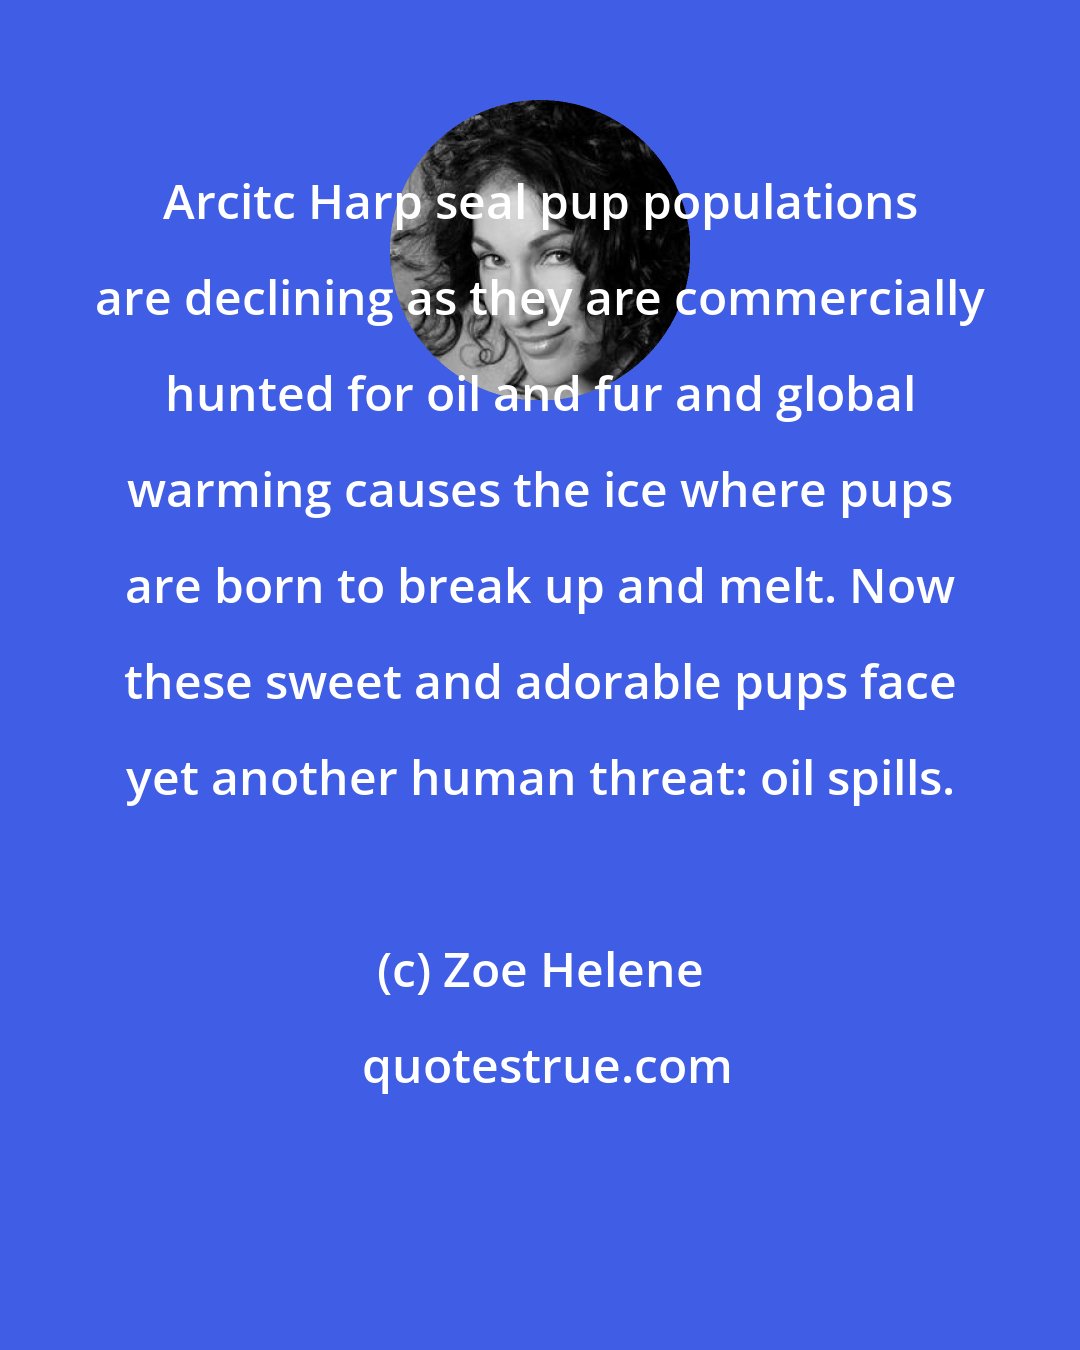 Zoe Helene: Arcitc Harp seal pup populations are declining as they are commercially hunted for oil and fur and global warming causes the ice where pups are born to break up and melt. Now these sweet and adorable pups face yet another human threat: oil spills.